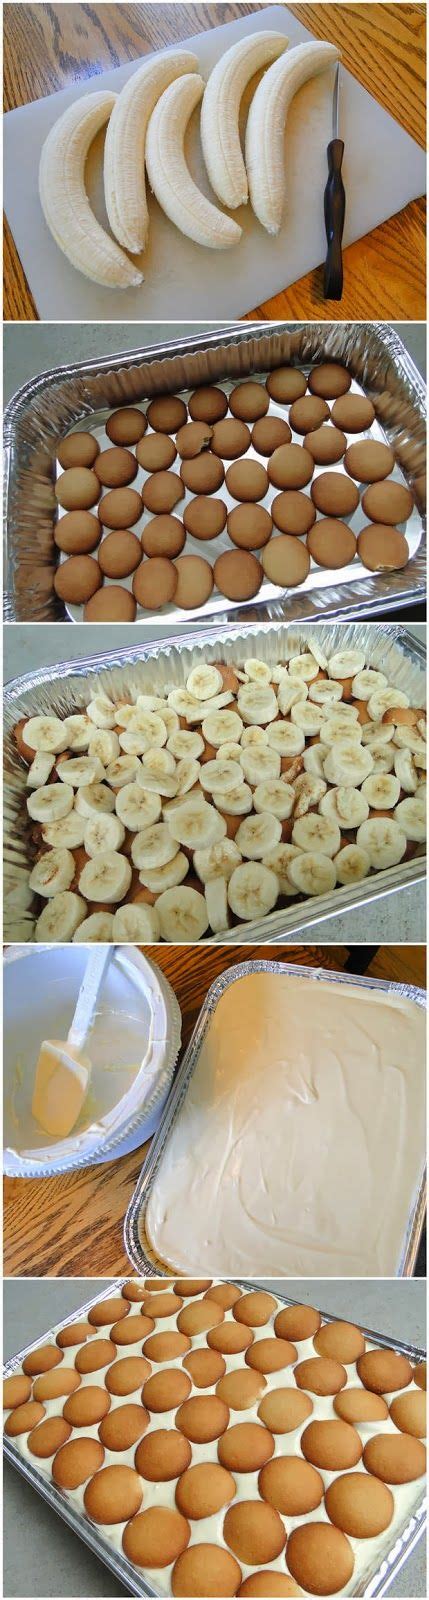 Add to pudding mixture, stirring until well blended. Banana Pudding Use 1 8oz container of Cool Whip; otherwise ...